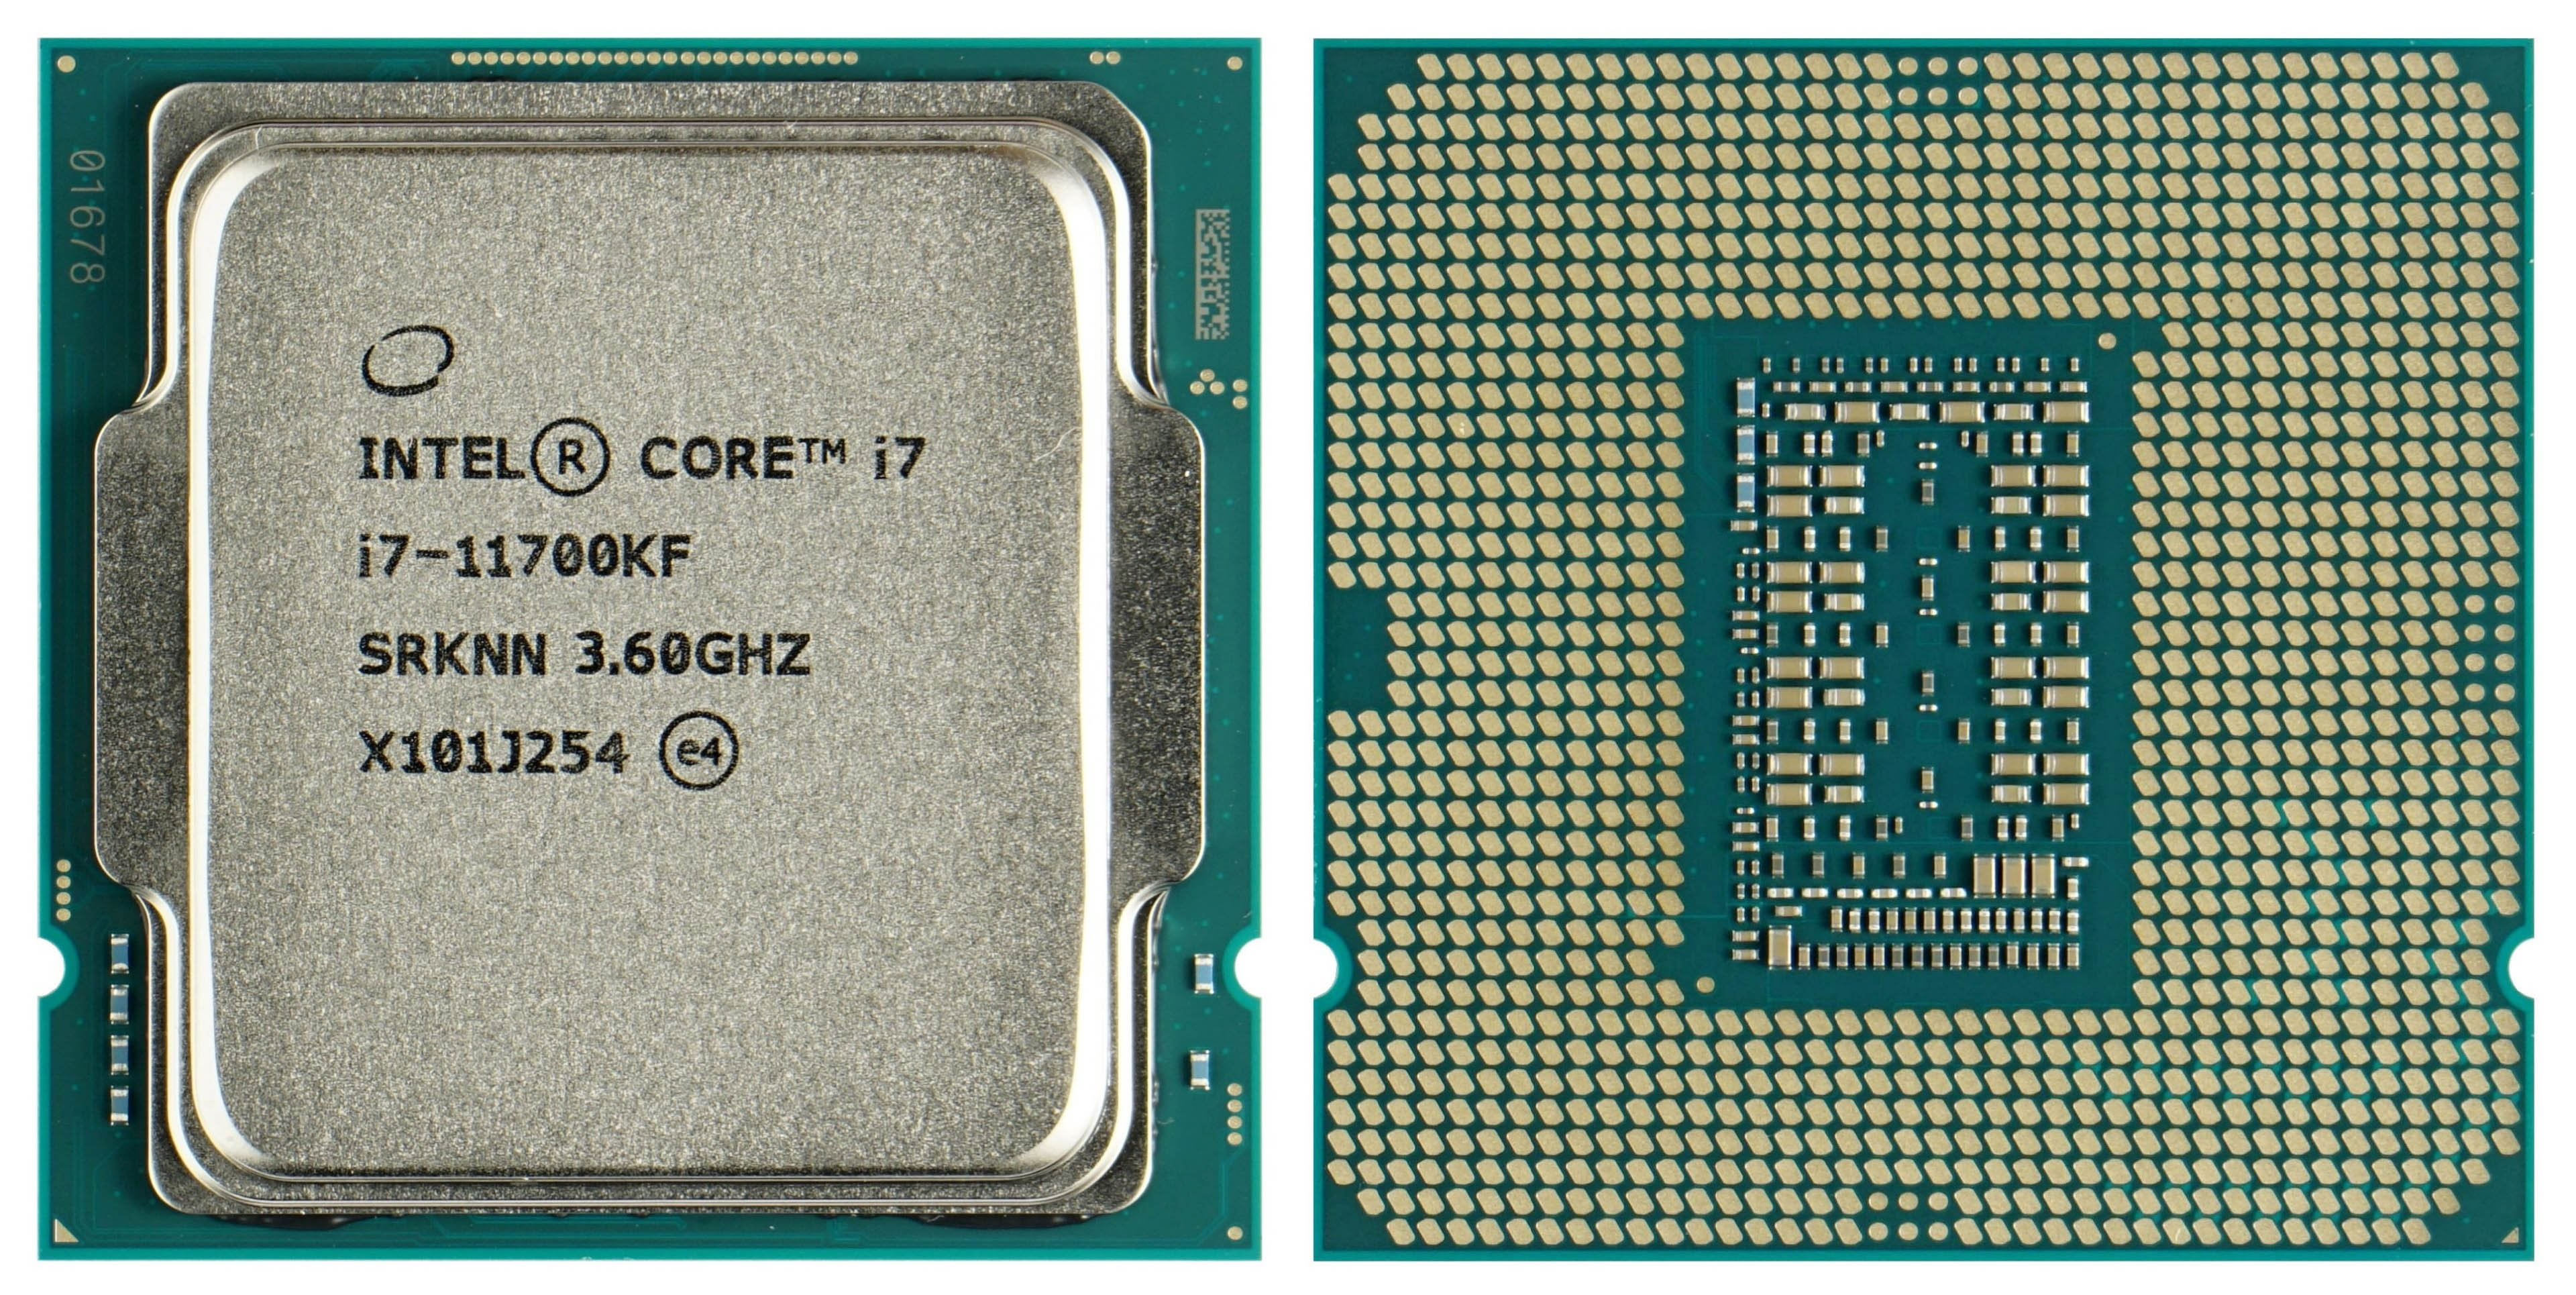 Intel Core i7-11700KF: A hair slower, but better value than Core 